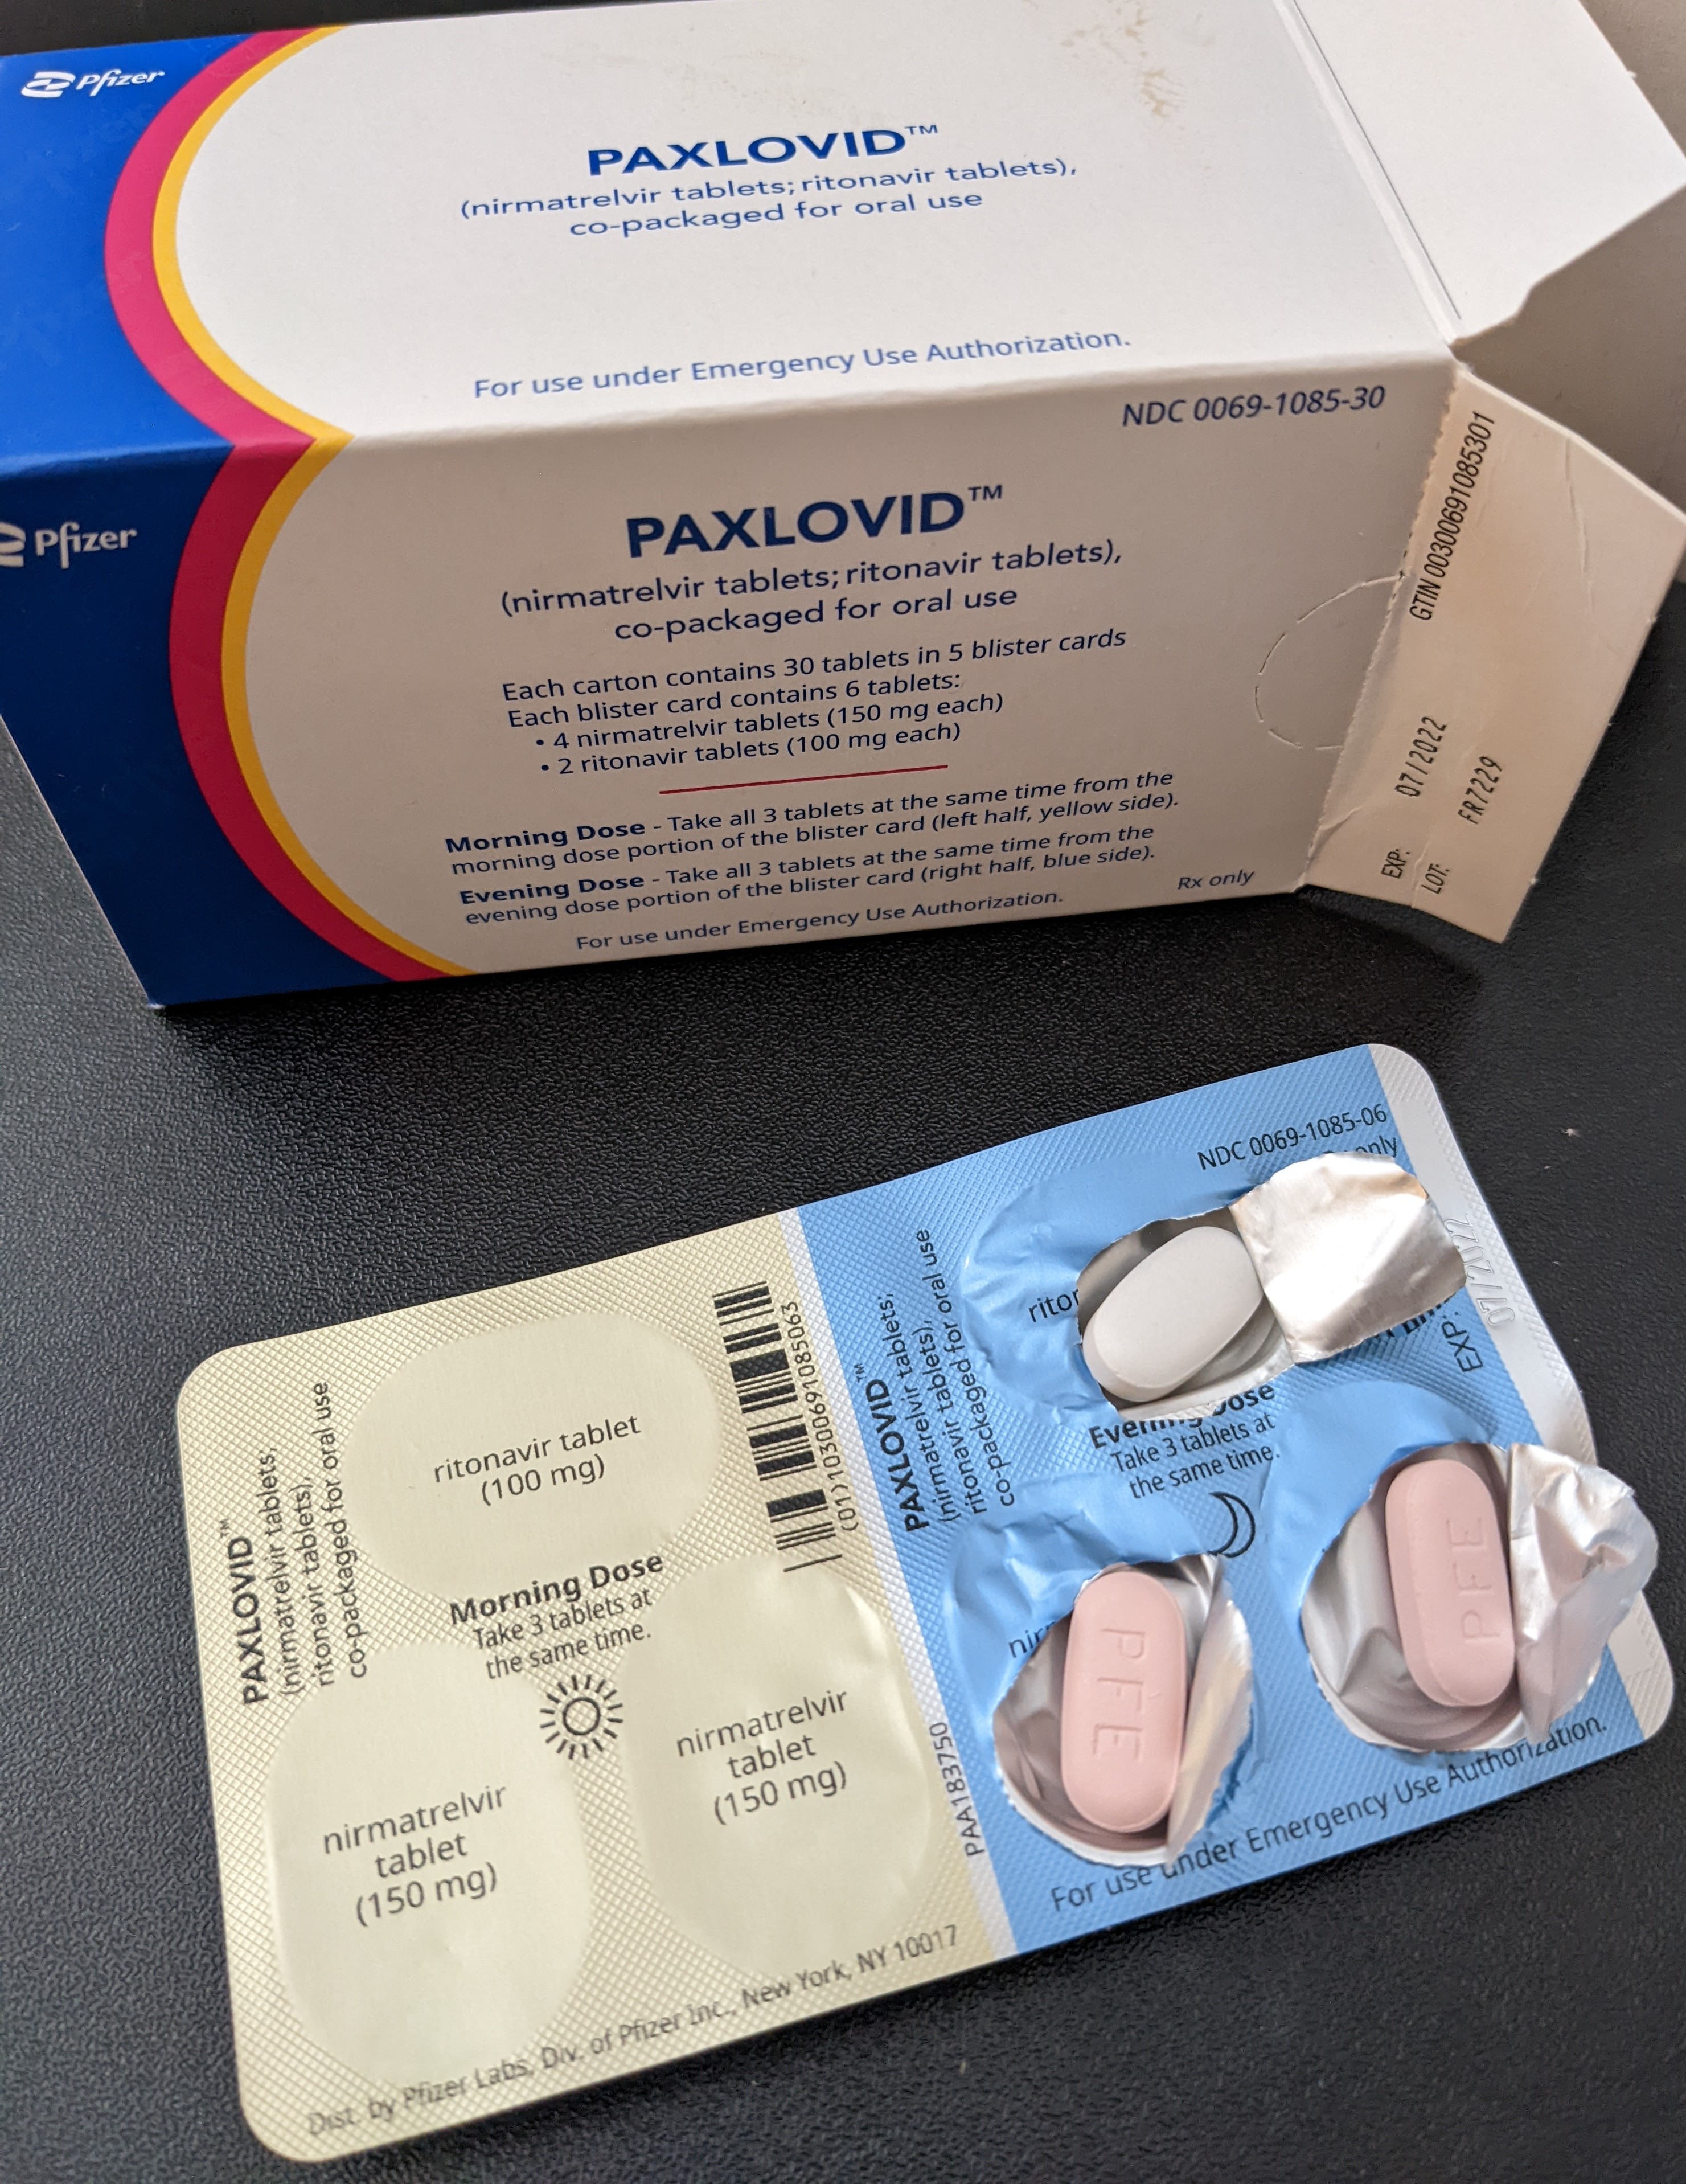 Health News Roundup: Evidence mounts for need to study Pfizer's Paxlovid for long COVID - researchers say; Shanghai says China's worst COVID outbreak is under "effective control" and more 